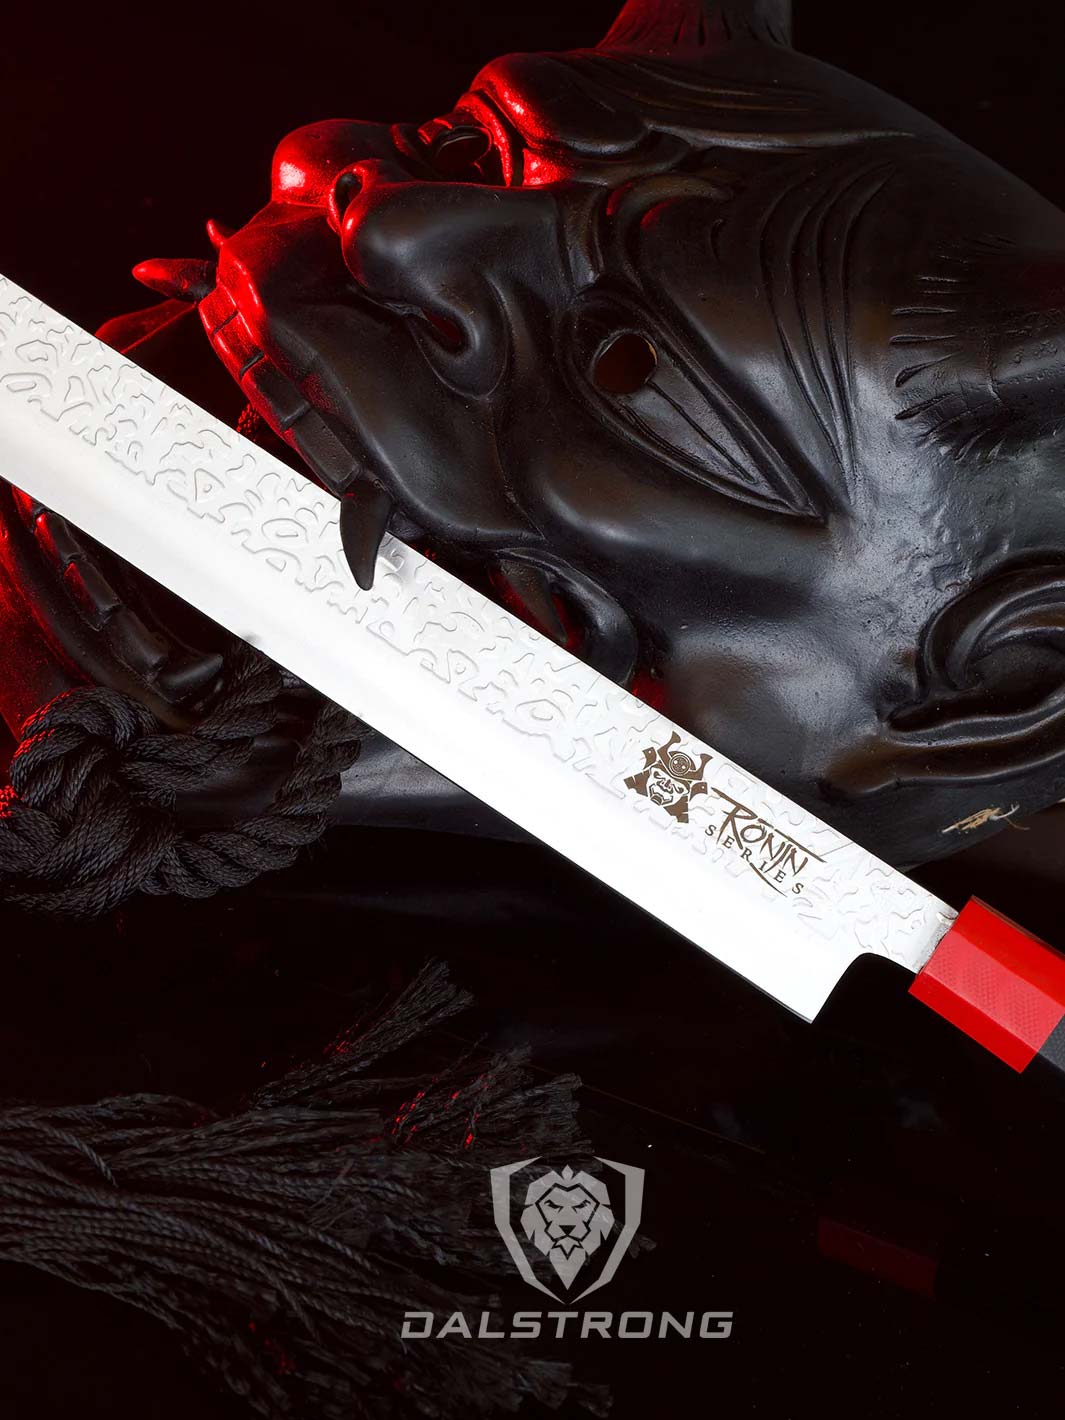 Dalstrong ronin series 12 inch slicing knife with black handle beside a samurai mask.